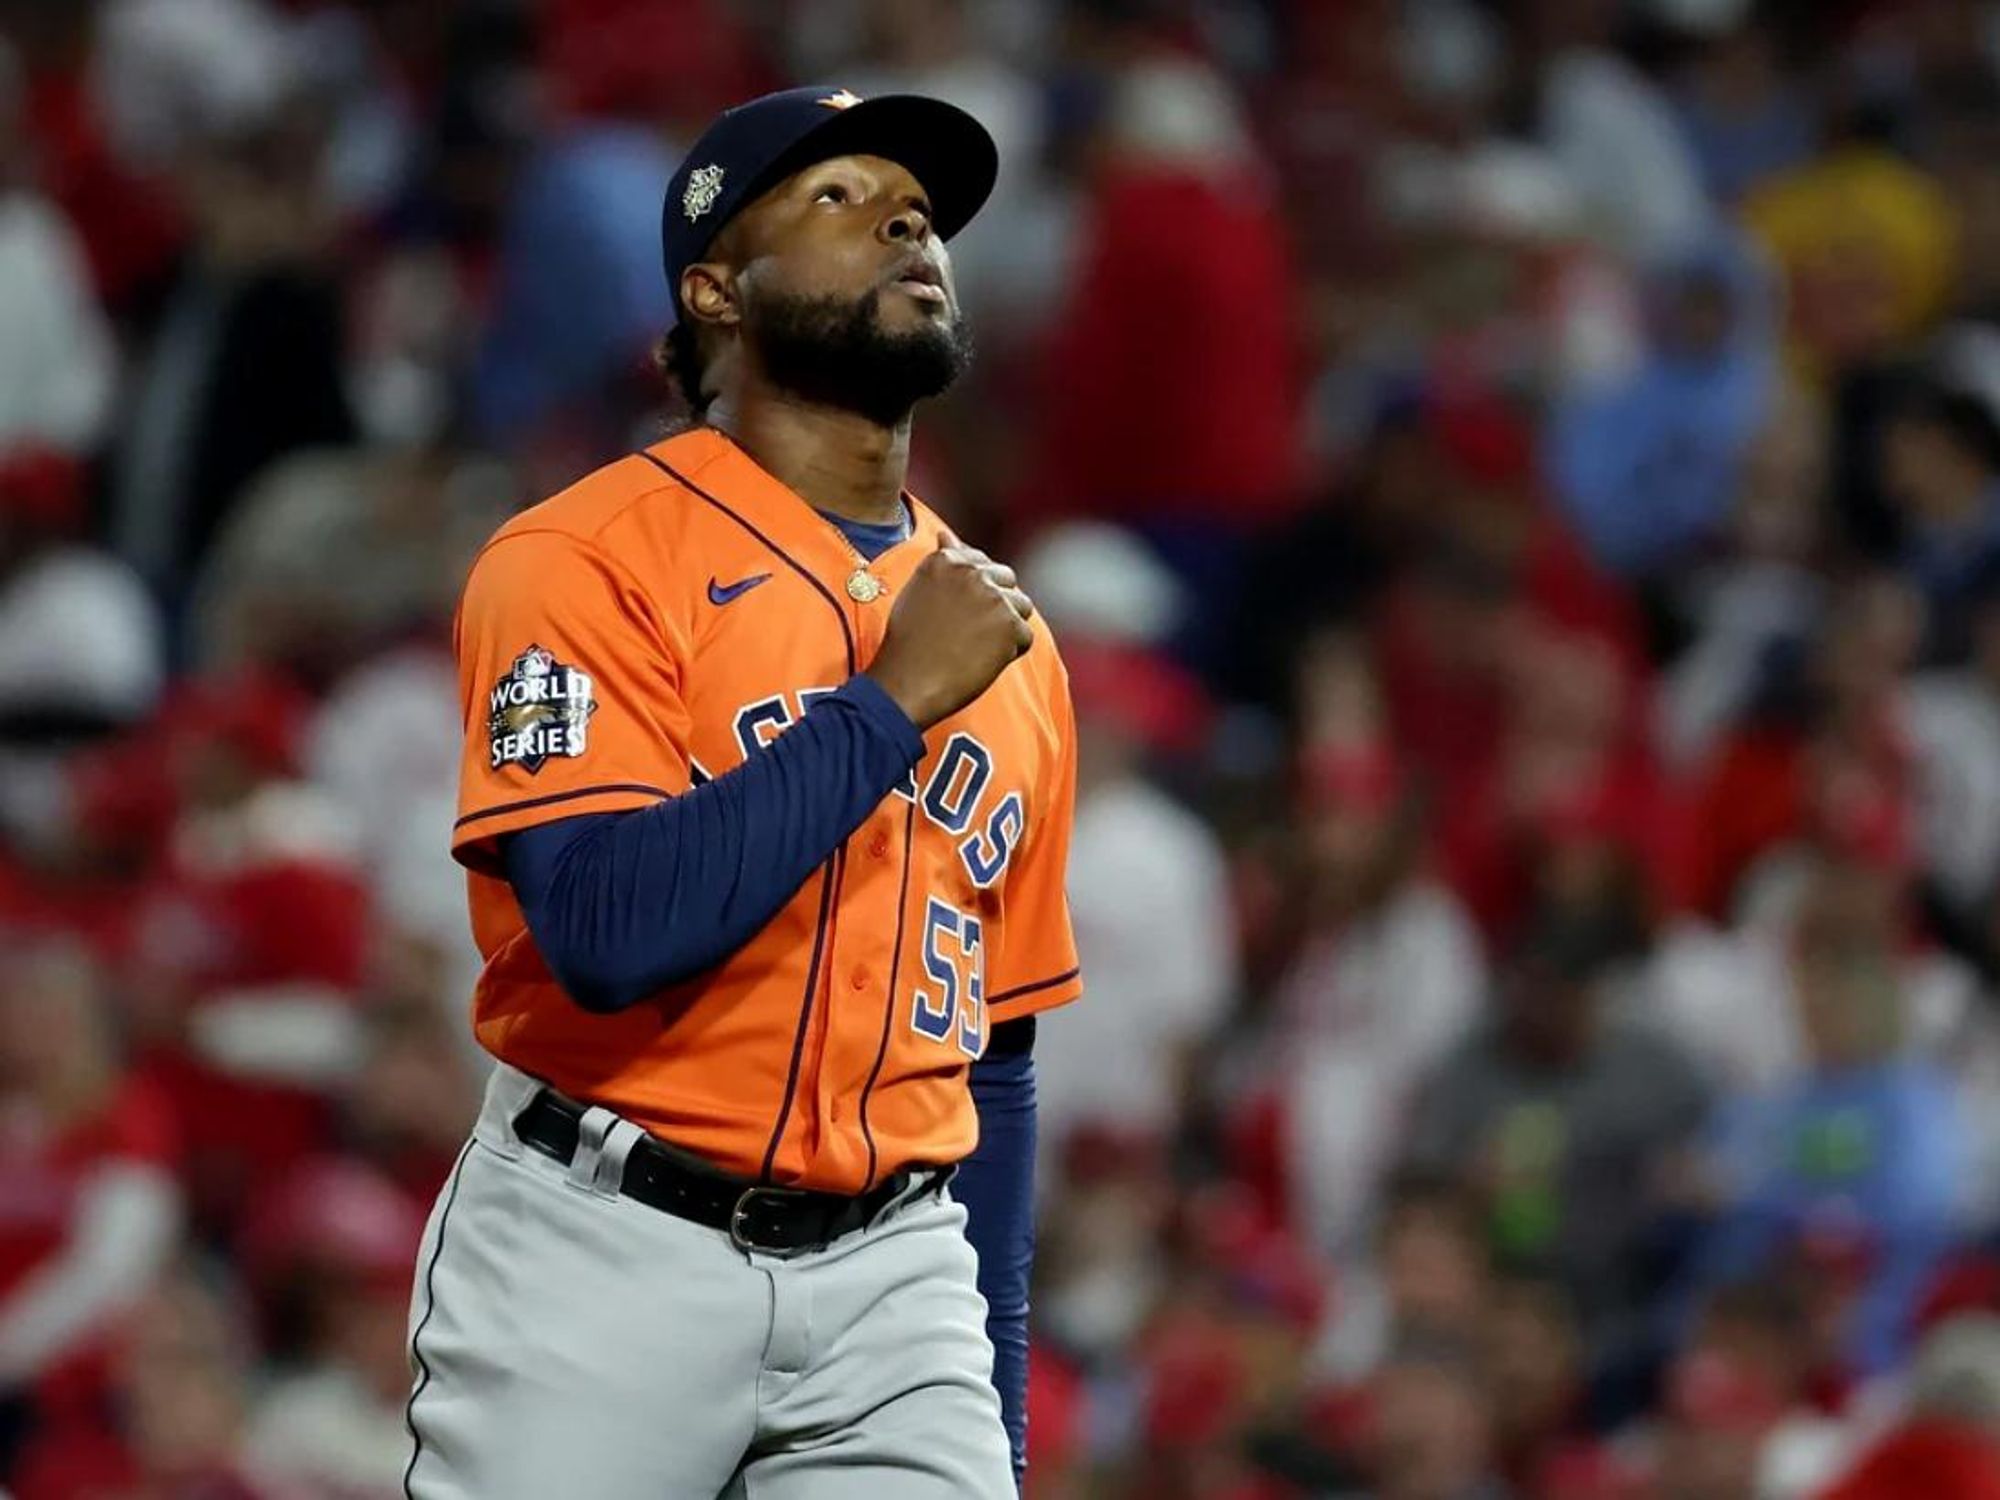 Ken Hoffman reminds Houston Astros fans to chill out — we got this -  CultureMap Houston